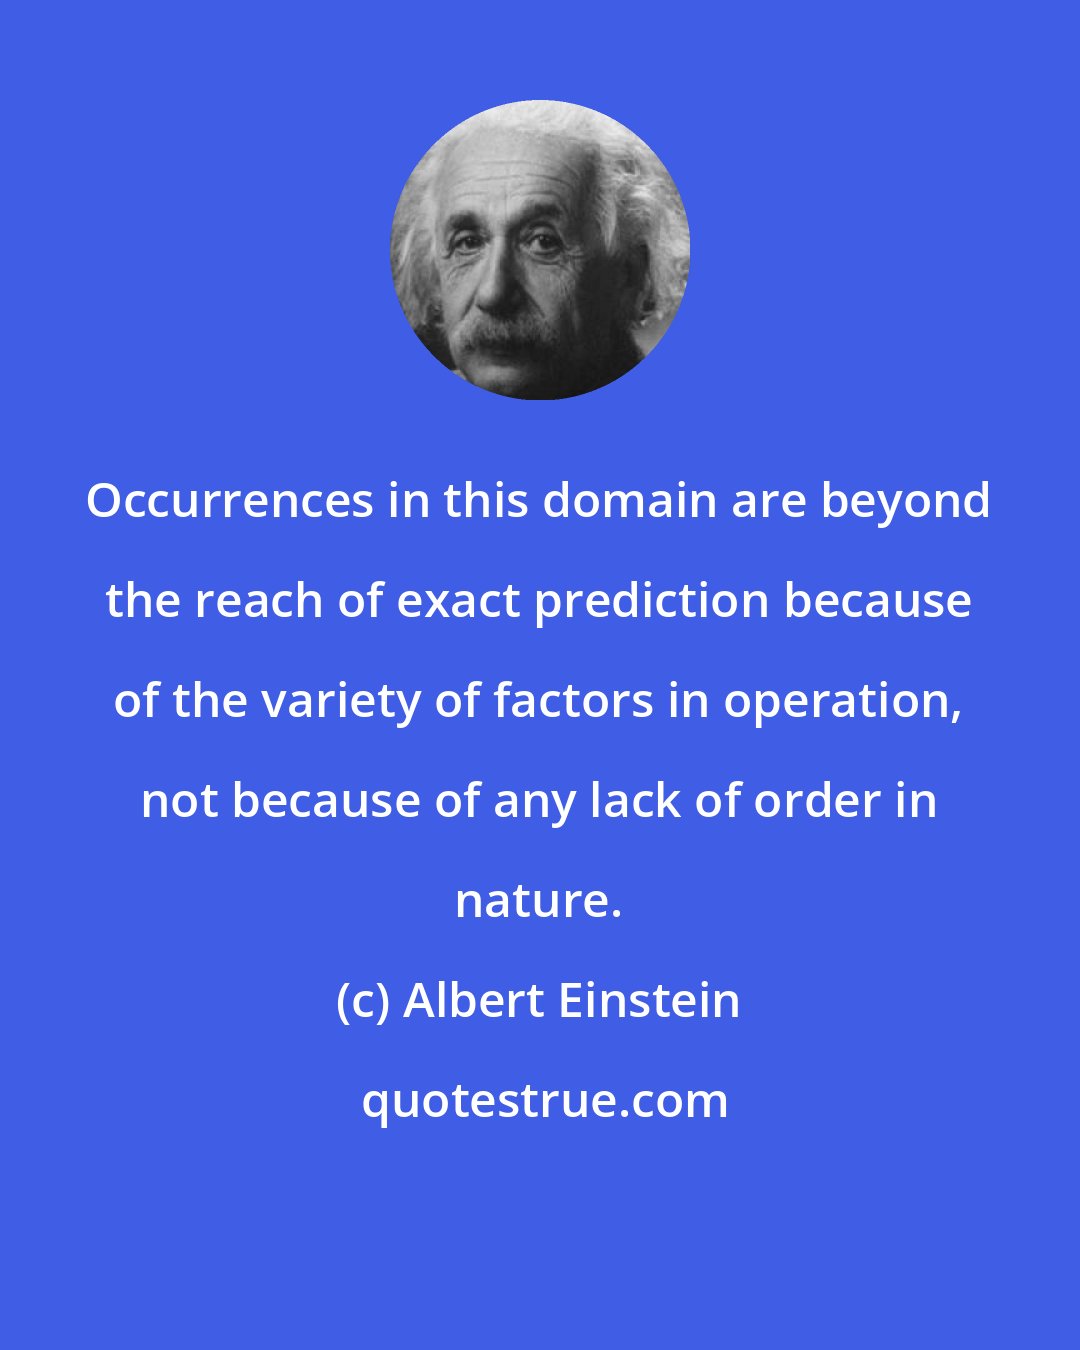 Albert Einstein: Occurrences in this domain are beyond the reach of exact prediction because of the variety of factors in operation, not because of any lack of order in nature.